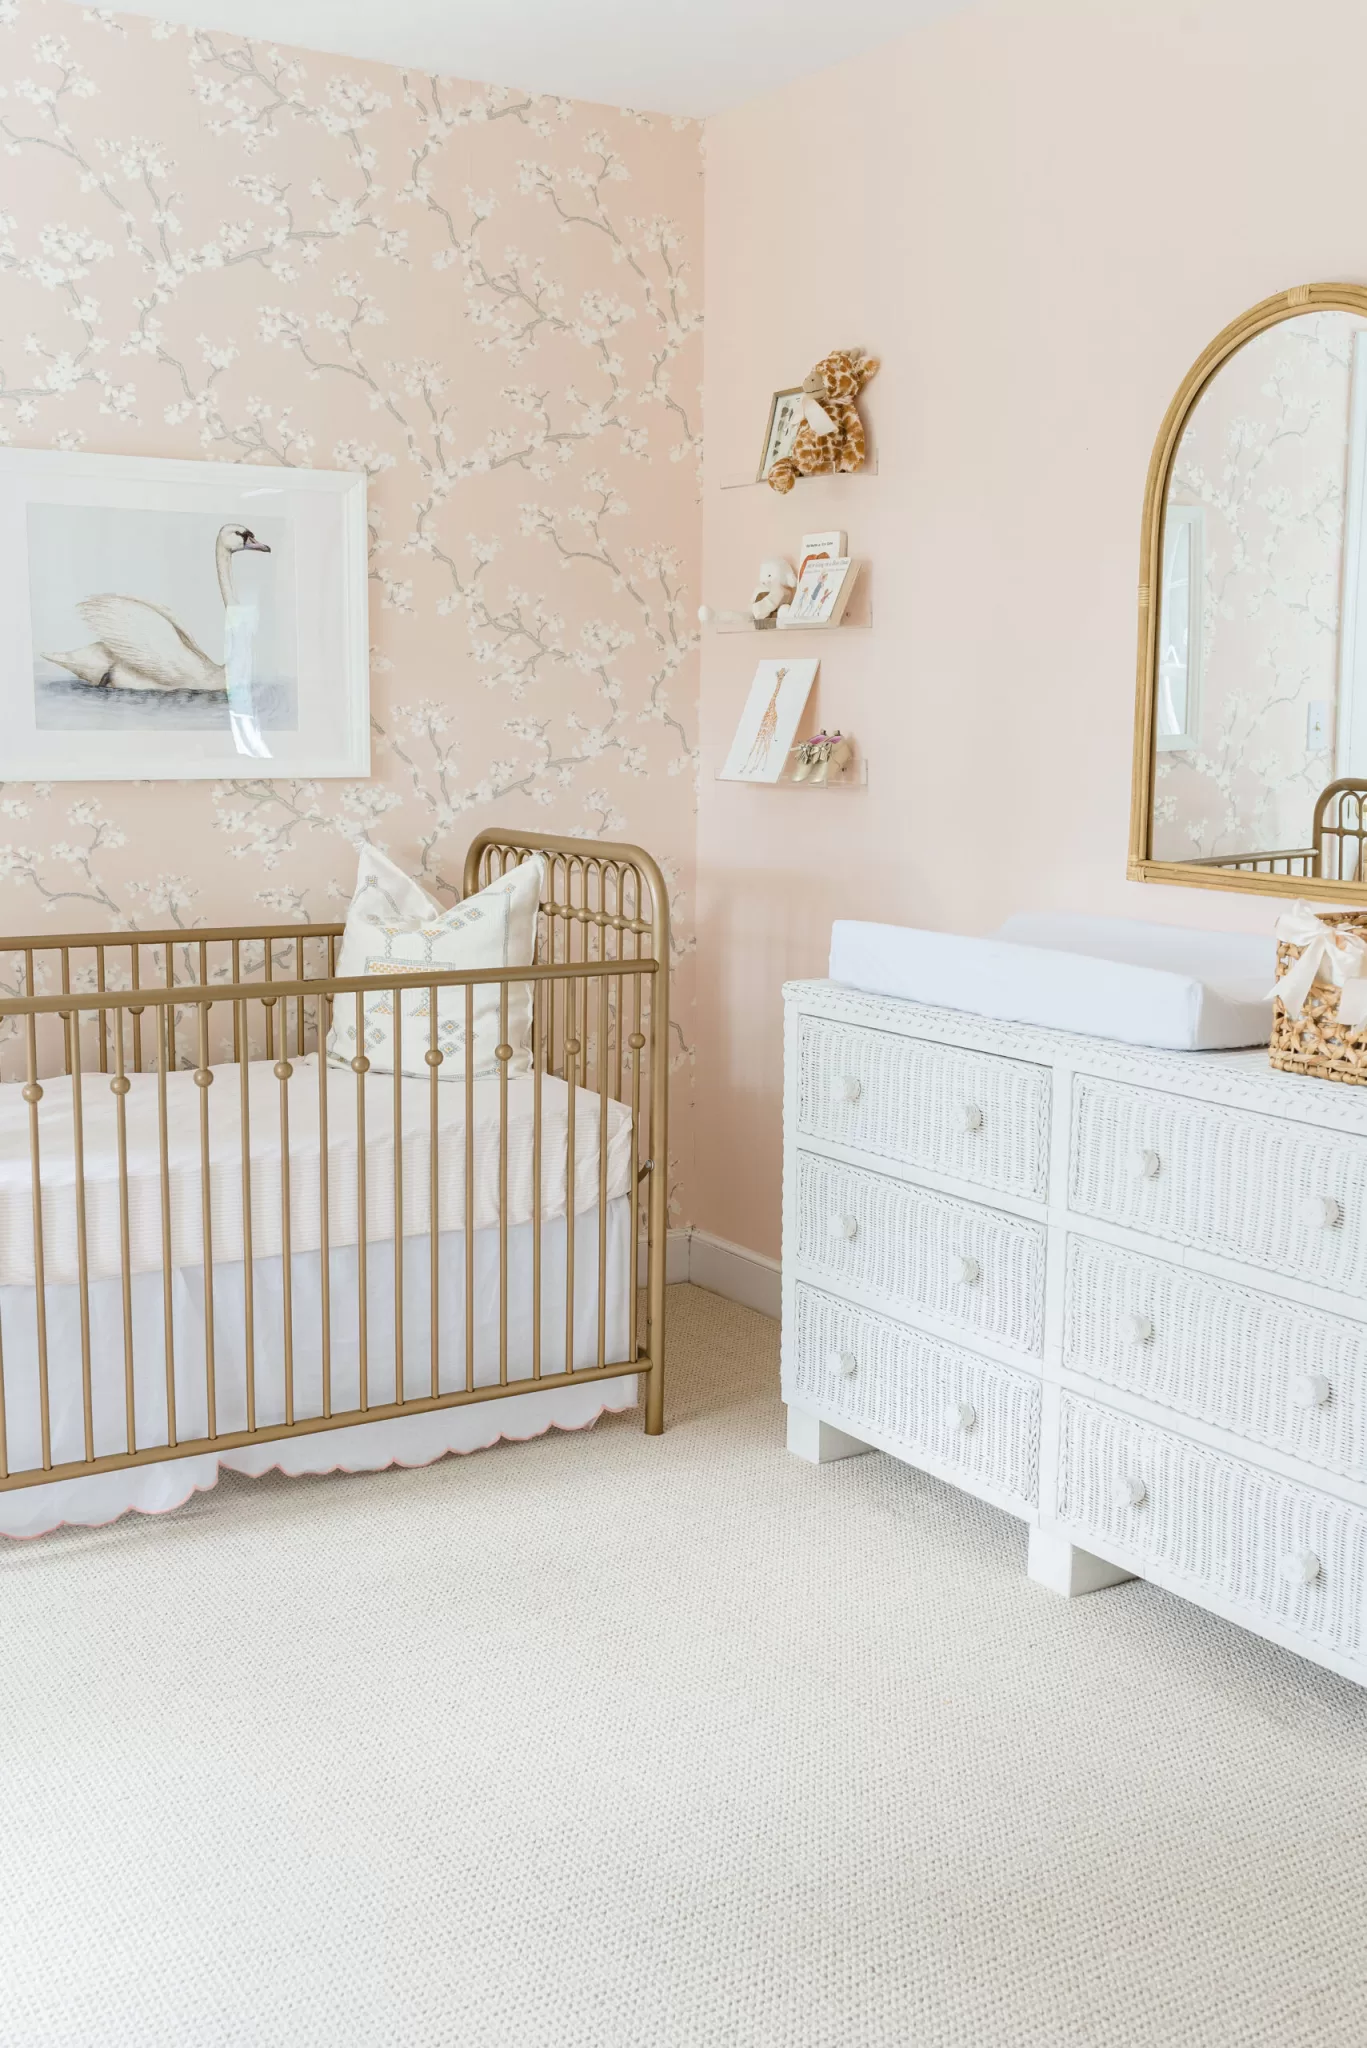 Our classic pink baby girl nursery